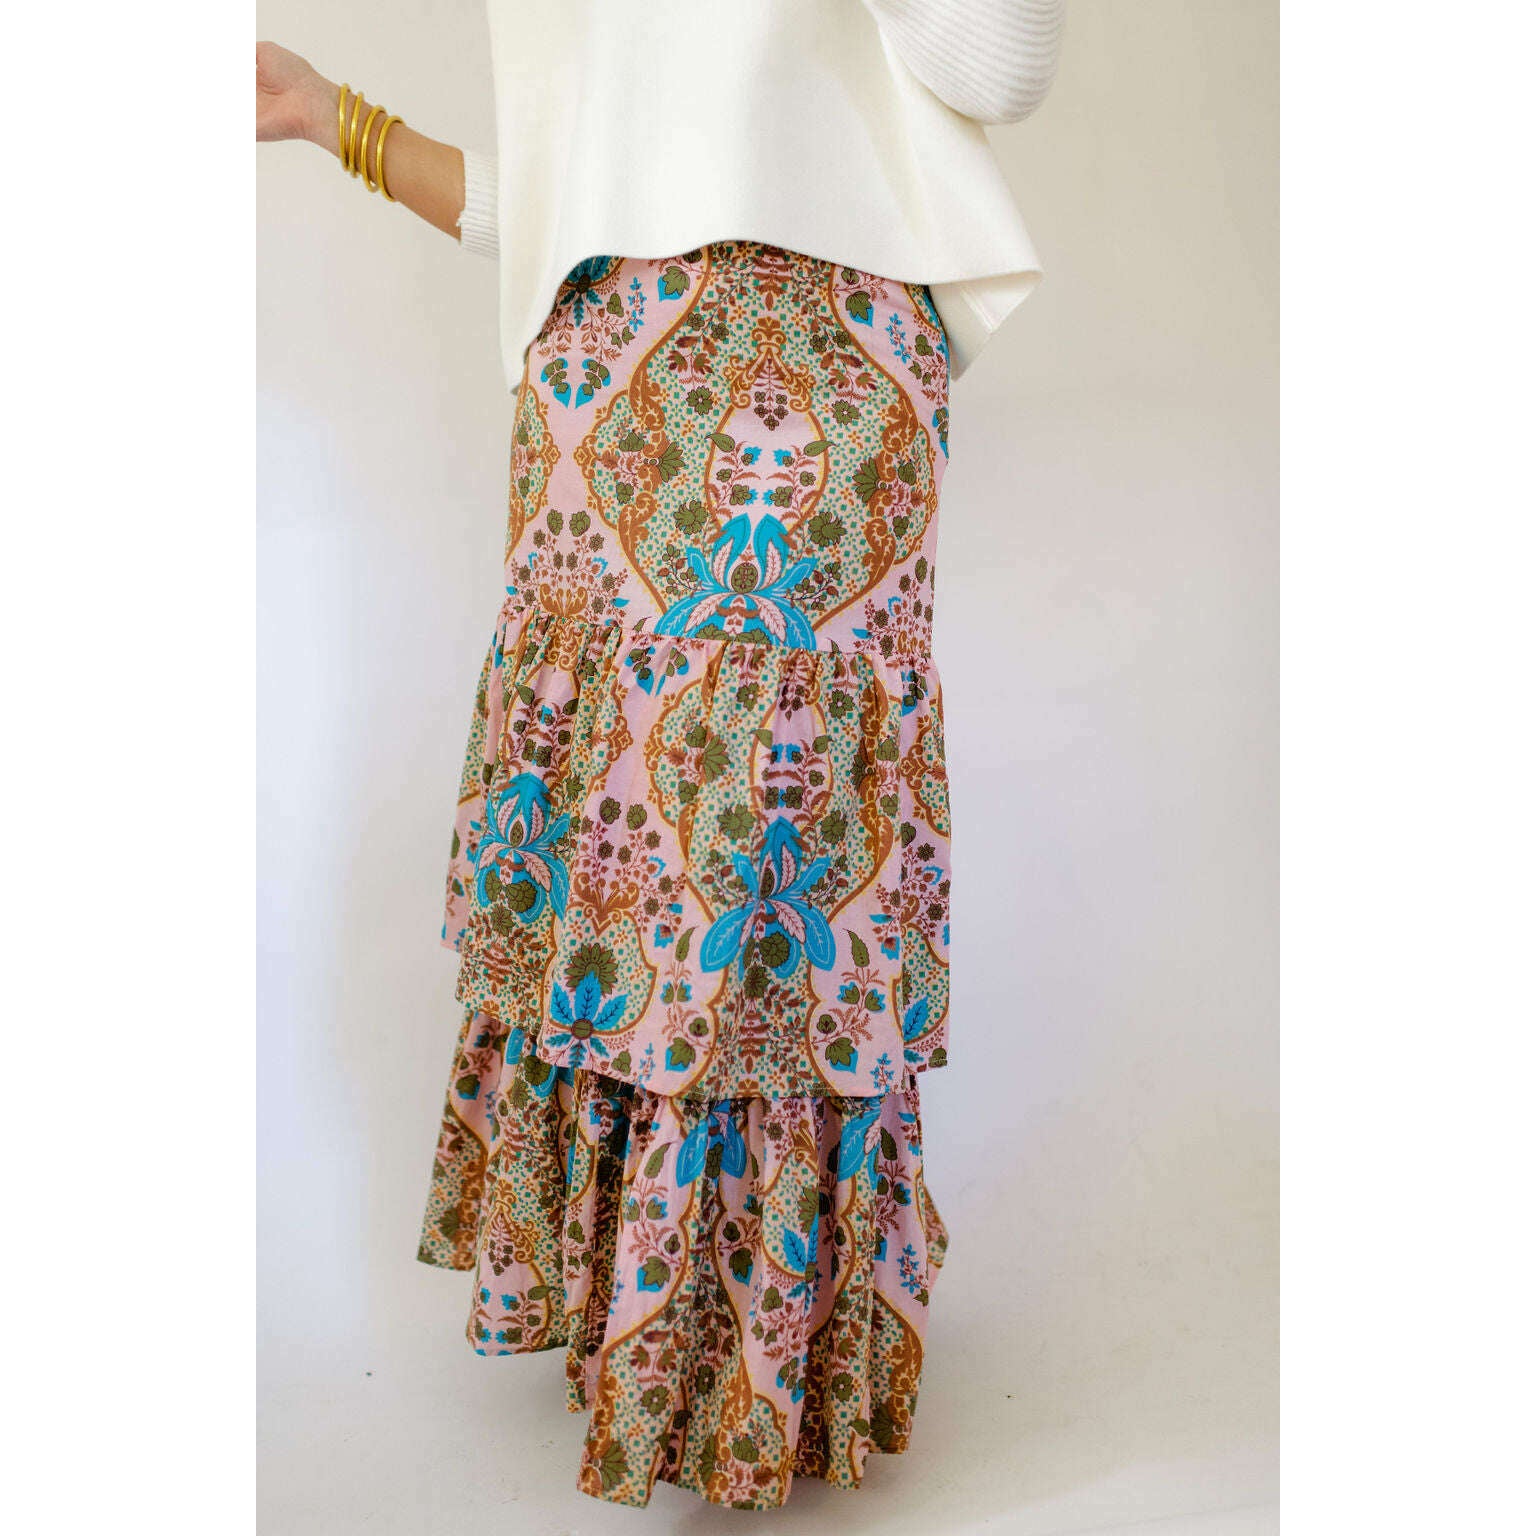 8.28 Boutique:Anna Cate Collection,Anna Cate Collections Amelia Skirt in Teal Paisley,skirt